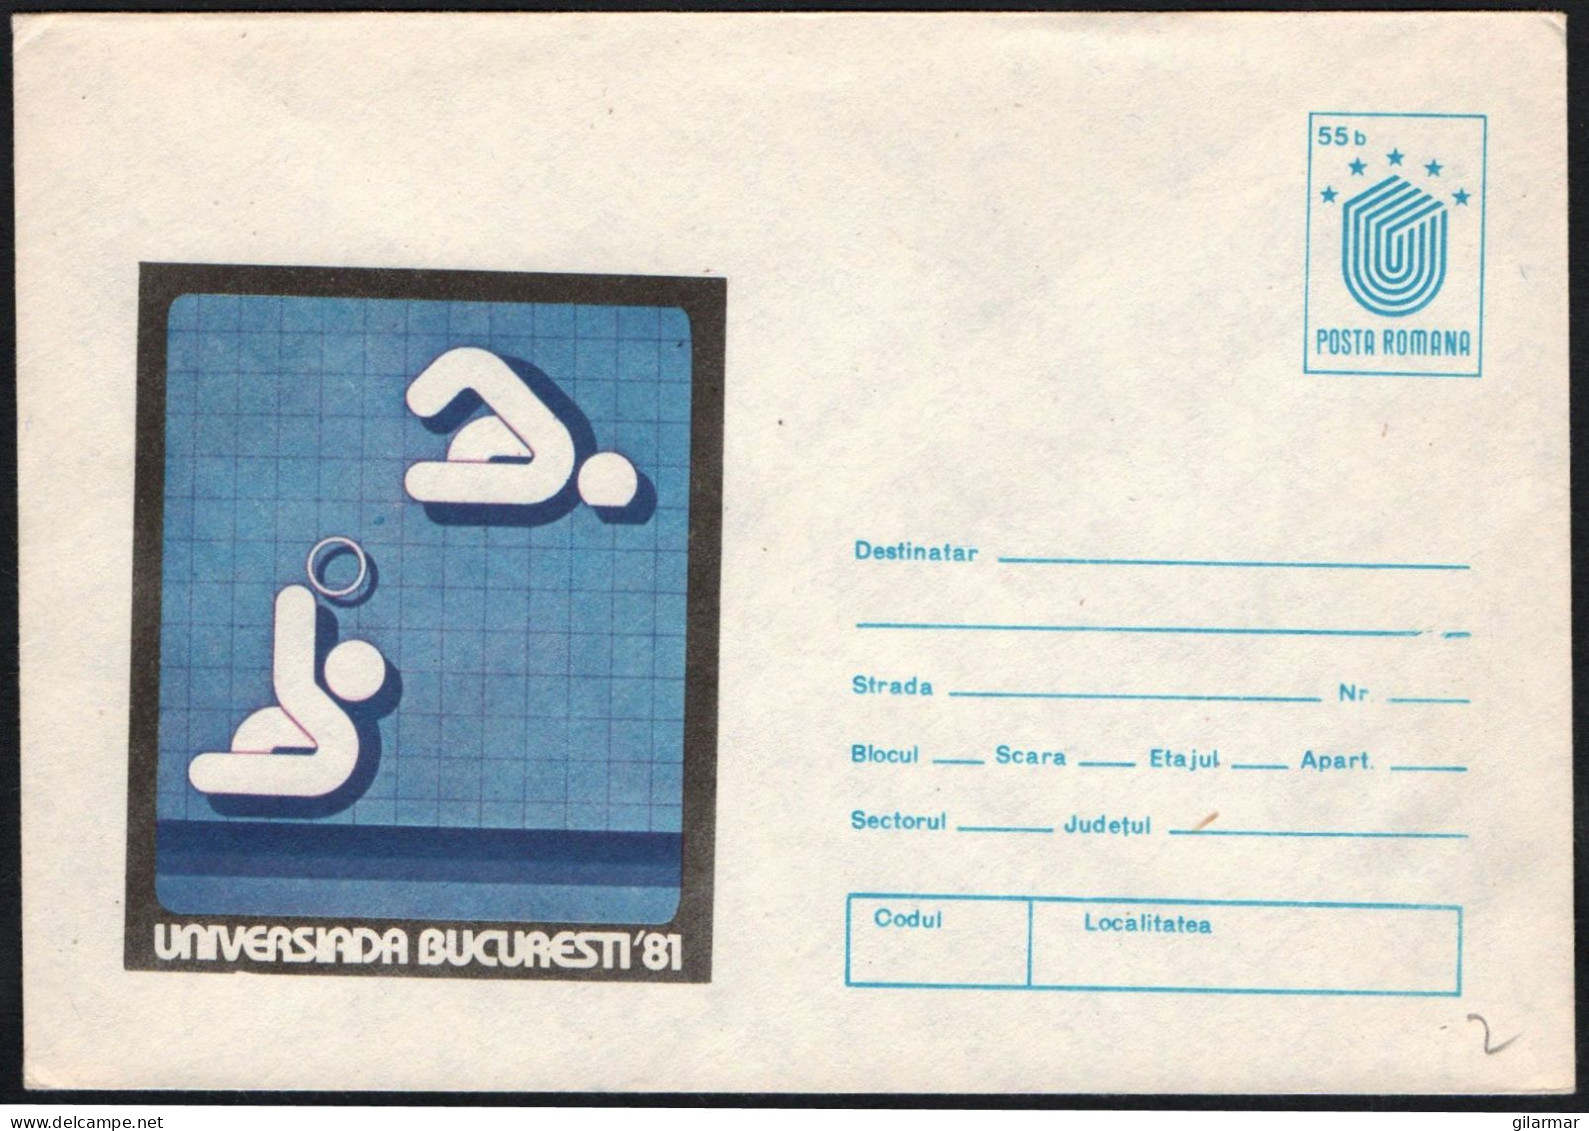 ROMANIA BUCHAREST 1981 - UNIVERSITY GAMES 1981 - STATIONARY: WATER POLO - MINT - G - Water Polo